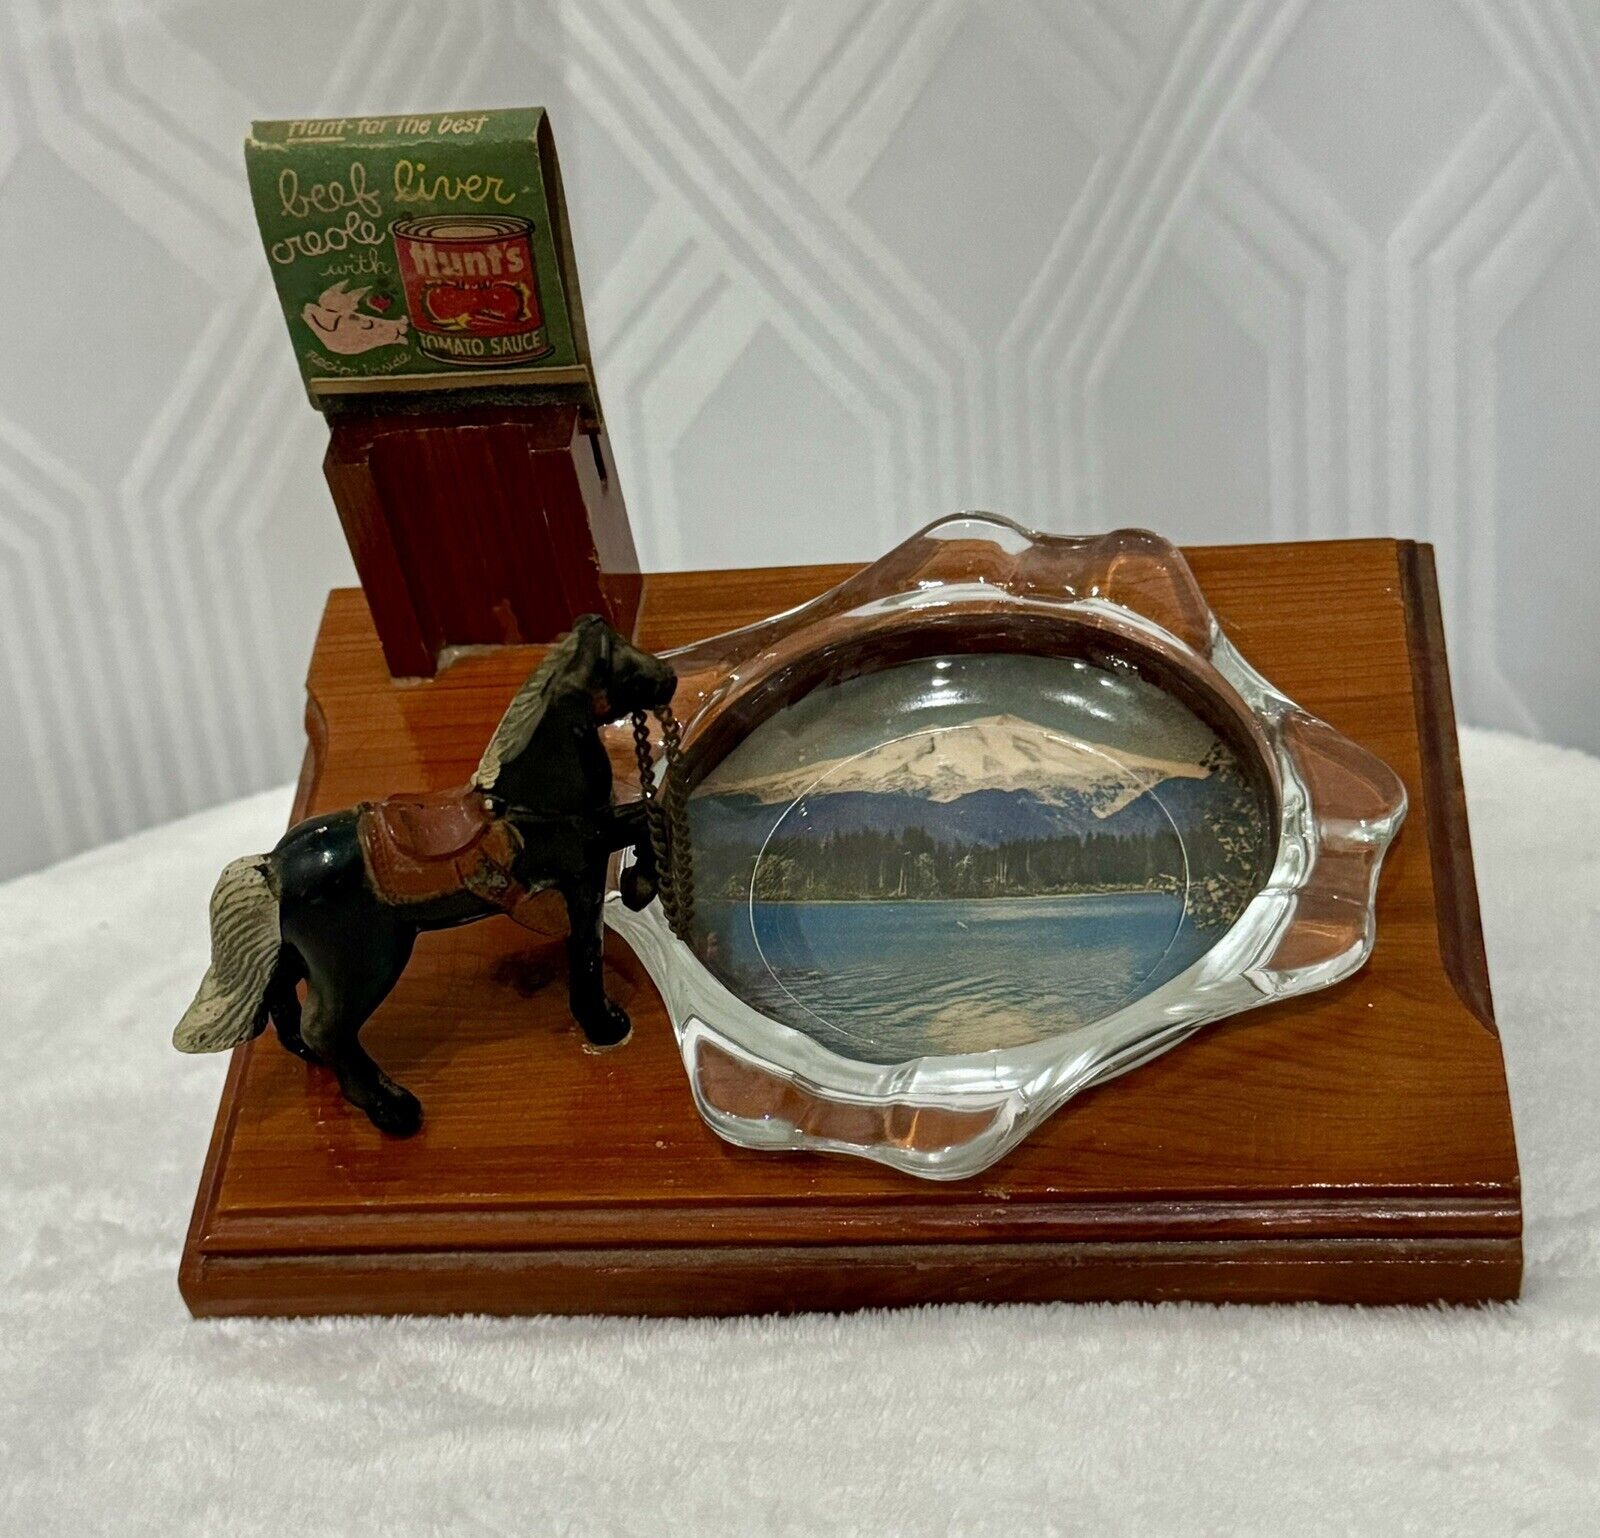 Vintage 70s Ashtray wooden/glass ashtray w/ horse match book holder water scene